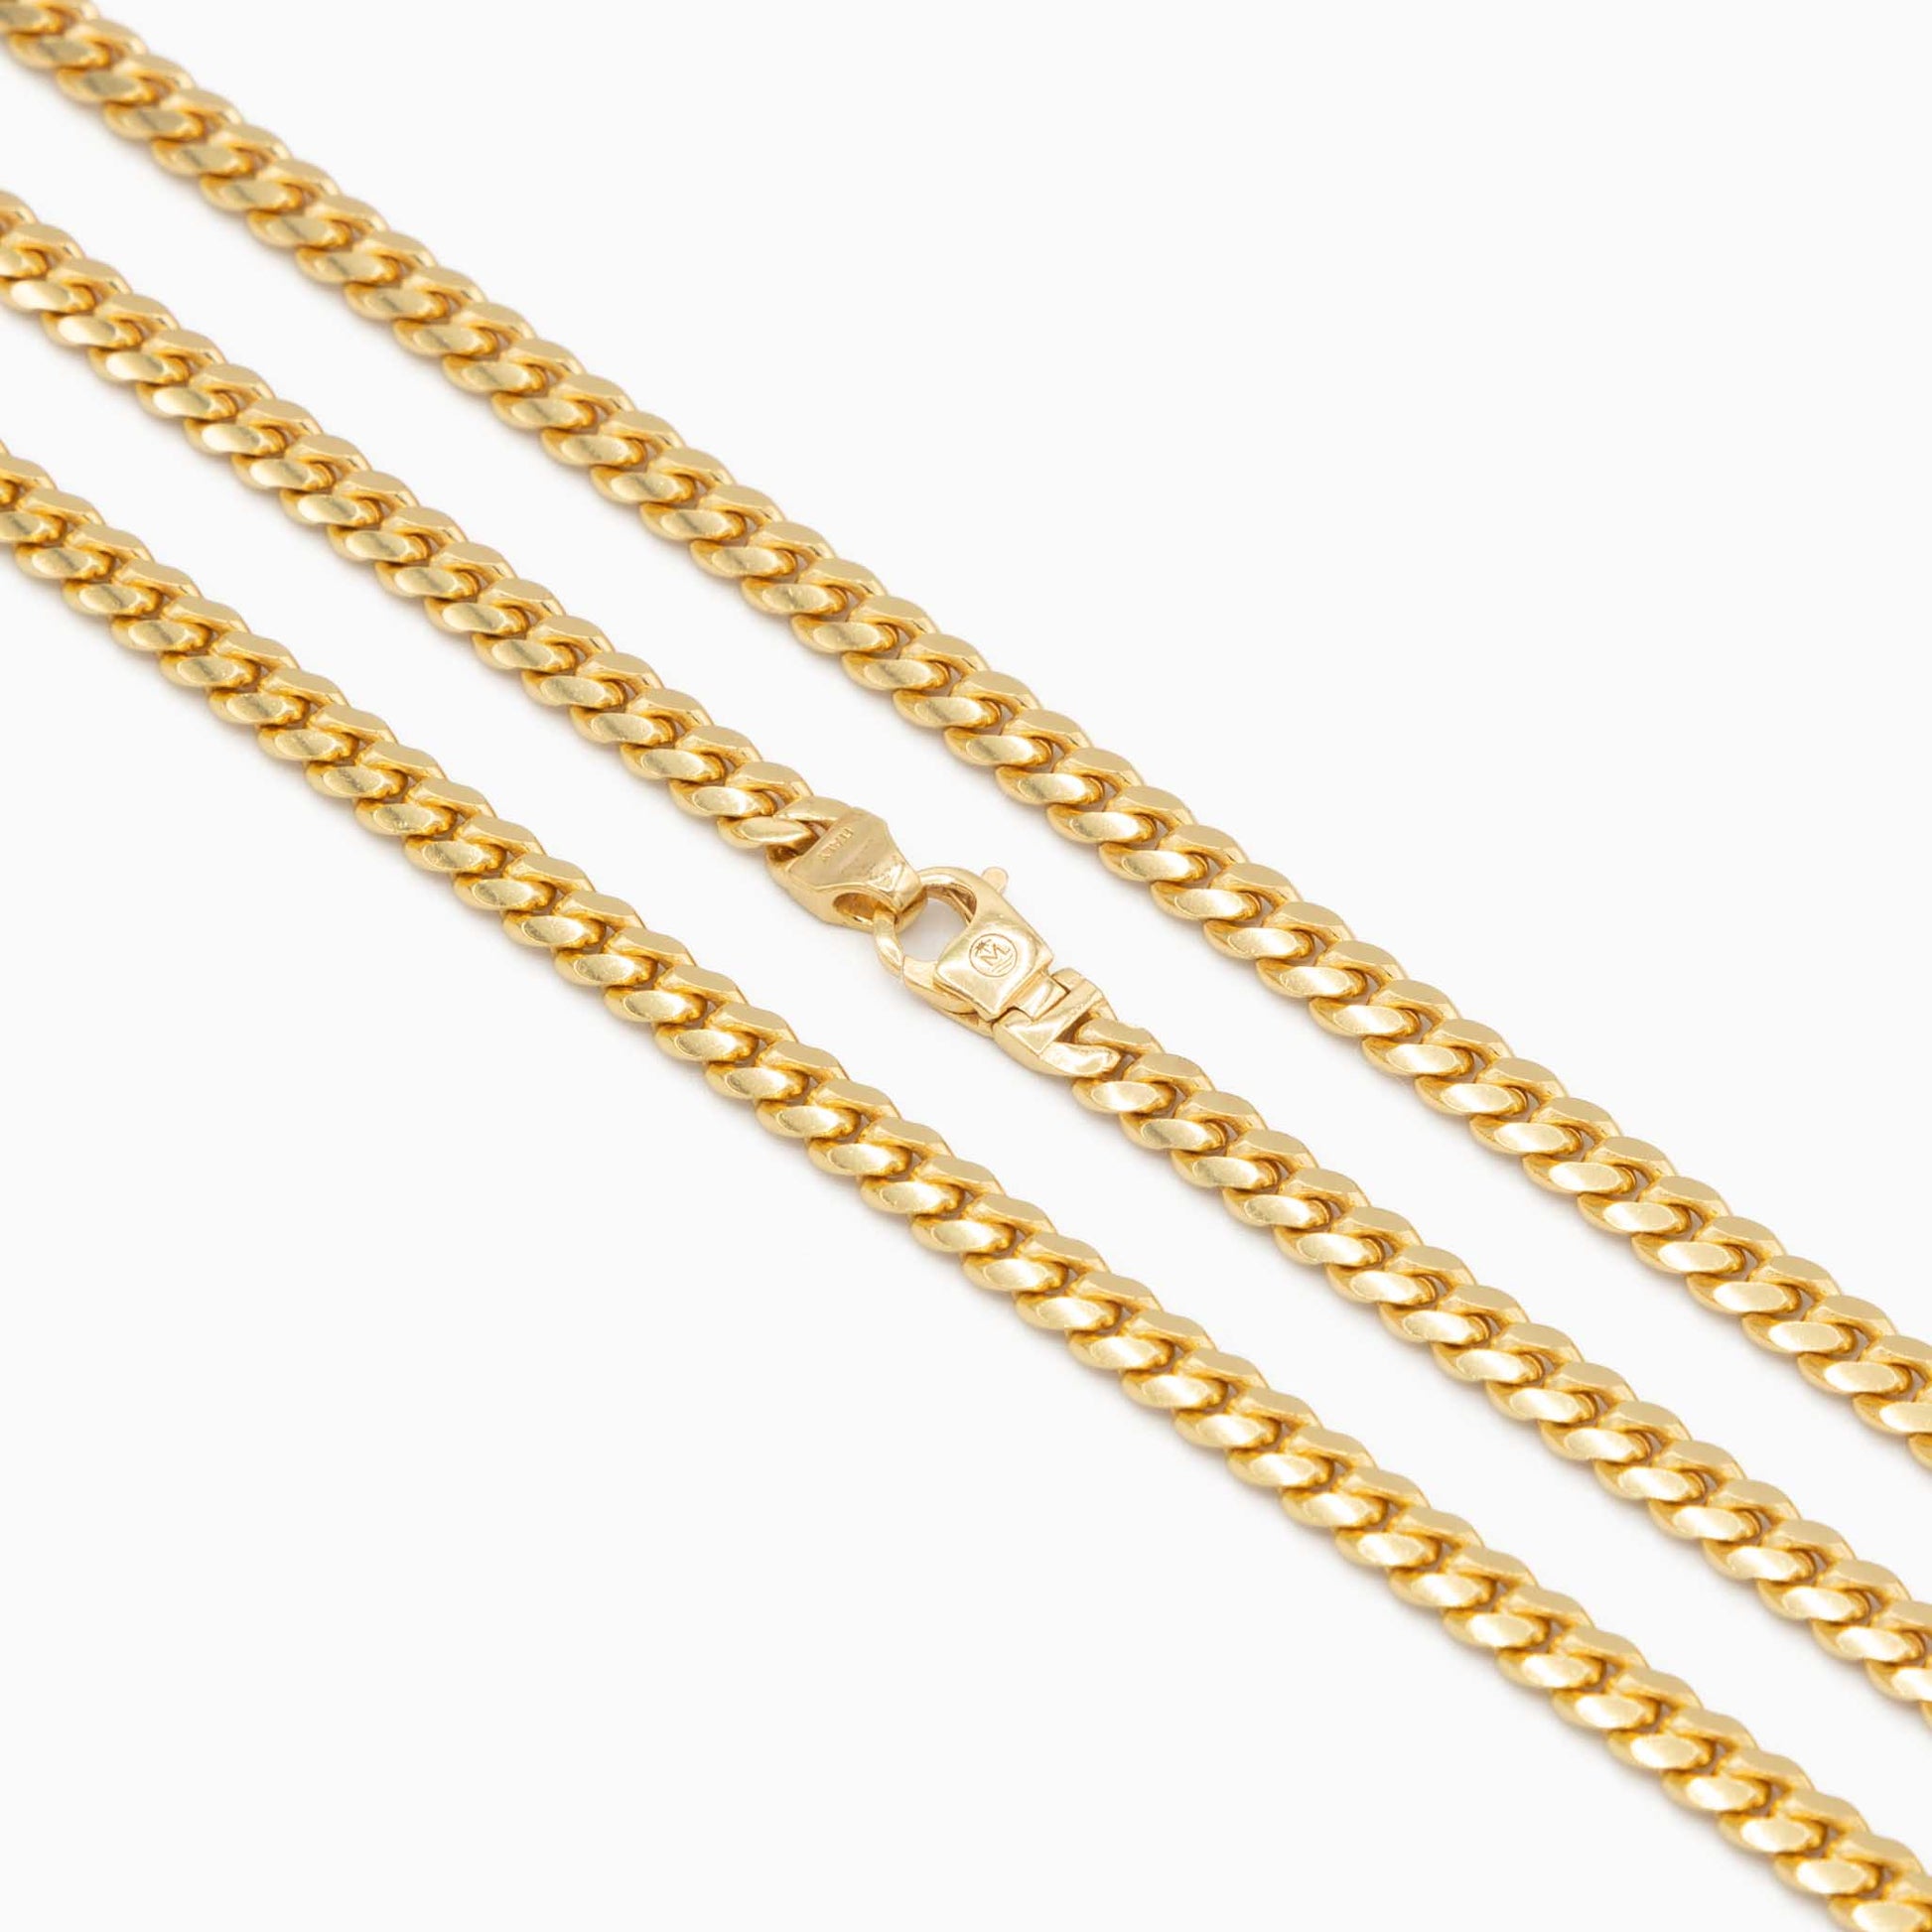 Fiusem gold cuban Link chain for Men, 5mm Mens chain Necklaces, Stainless  Steel chain Necklaces for Men Women and Boys